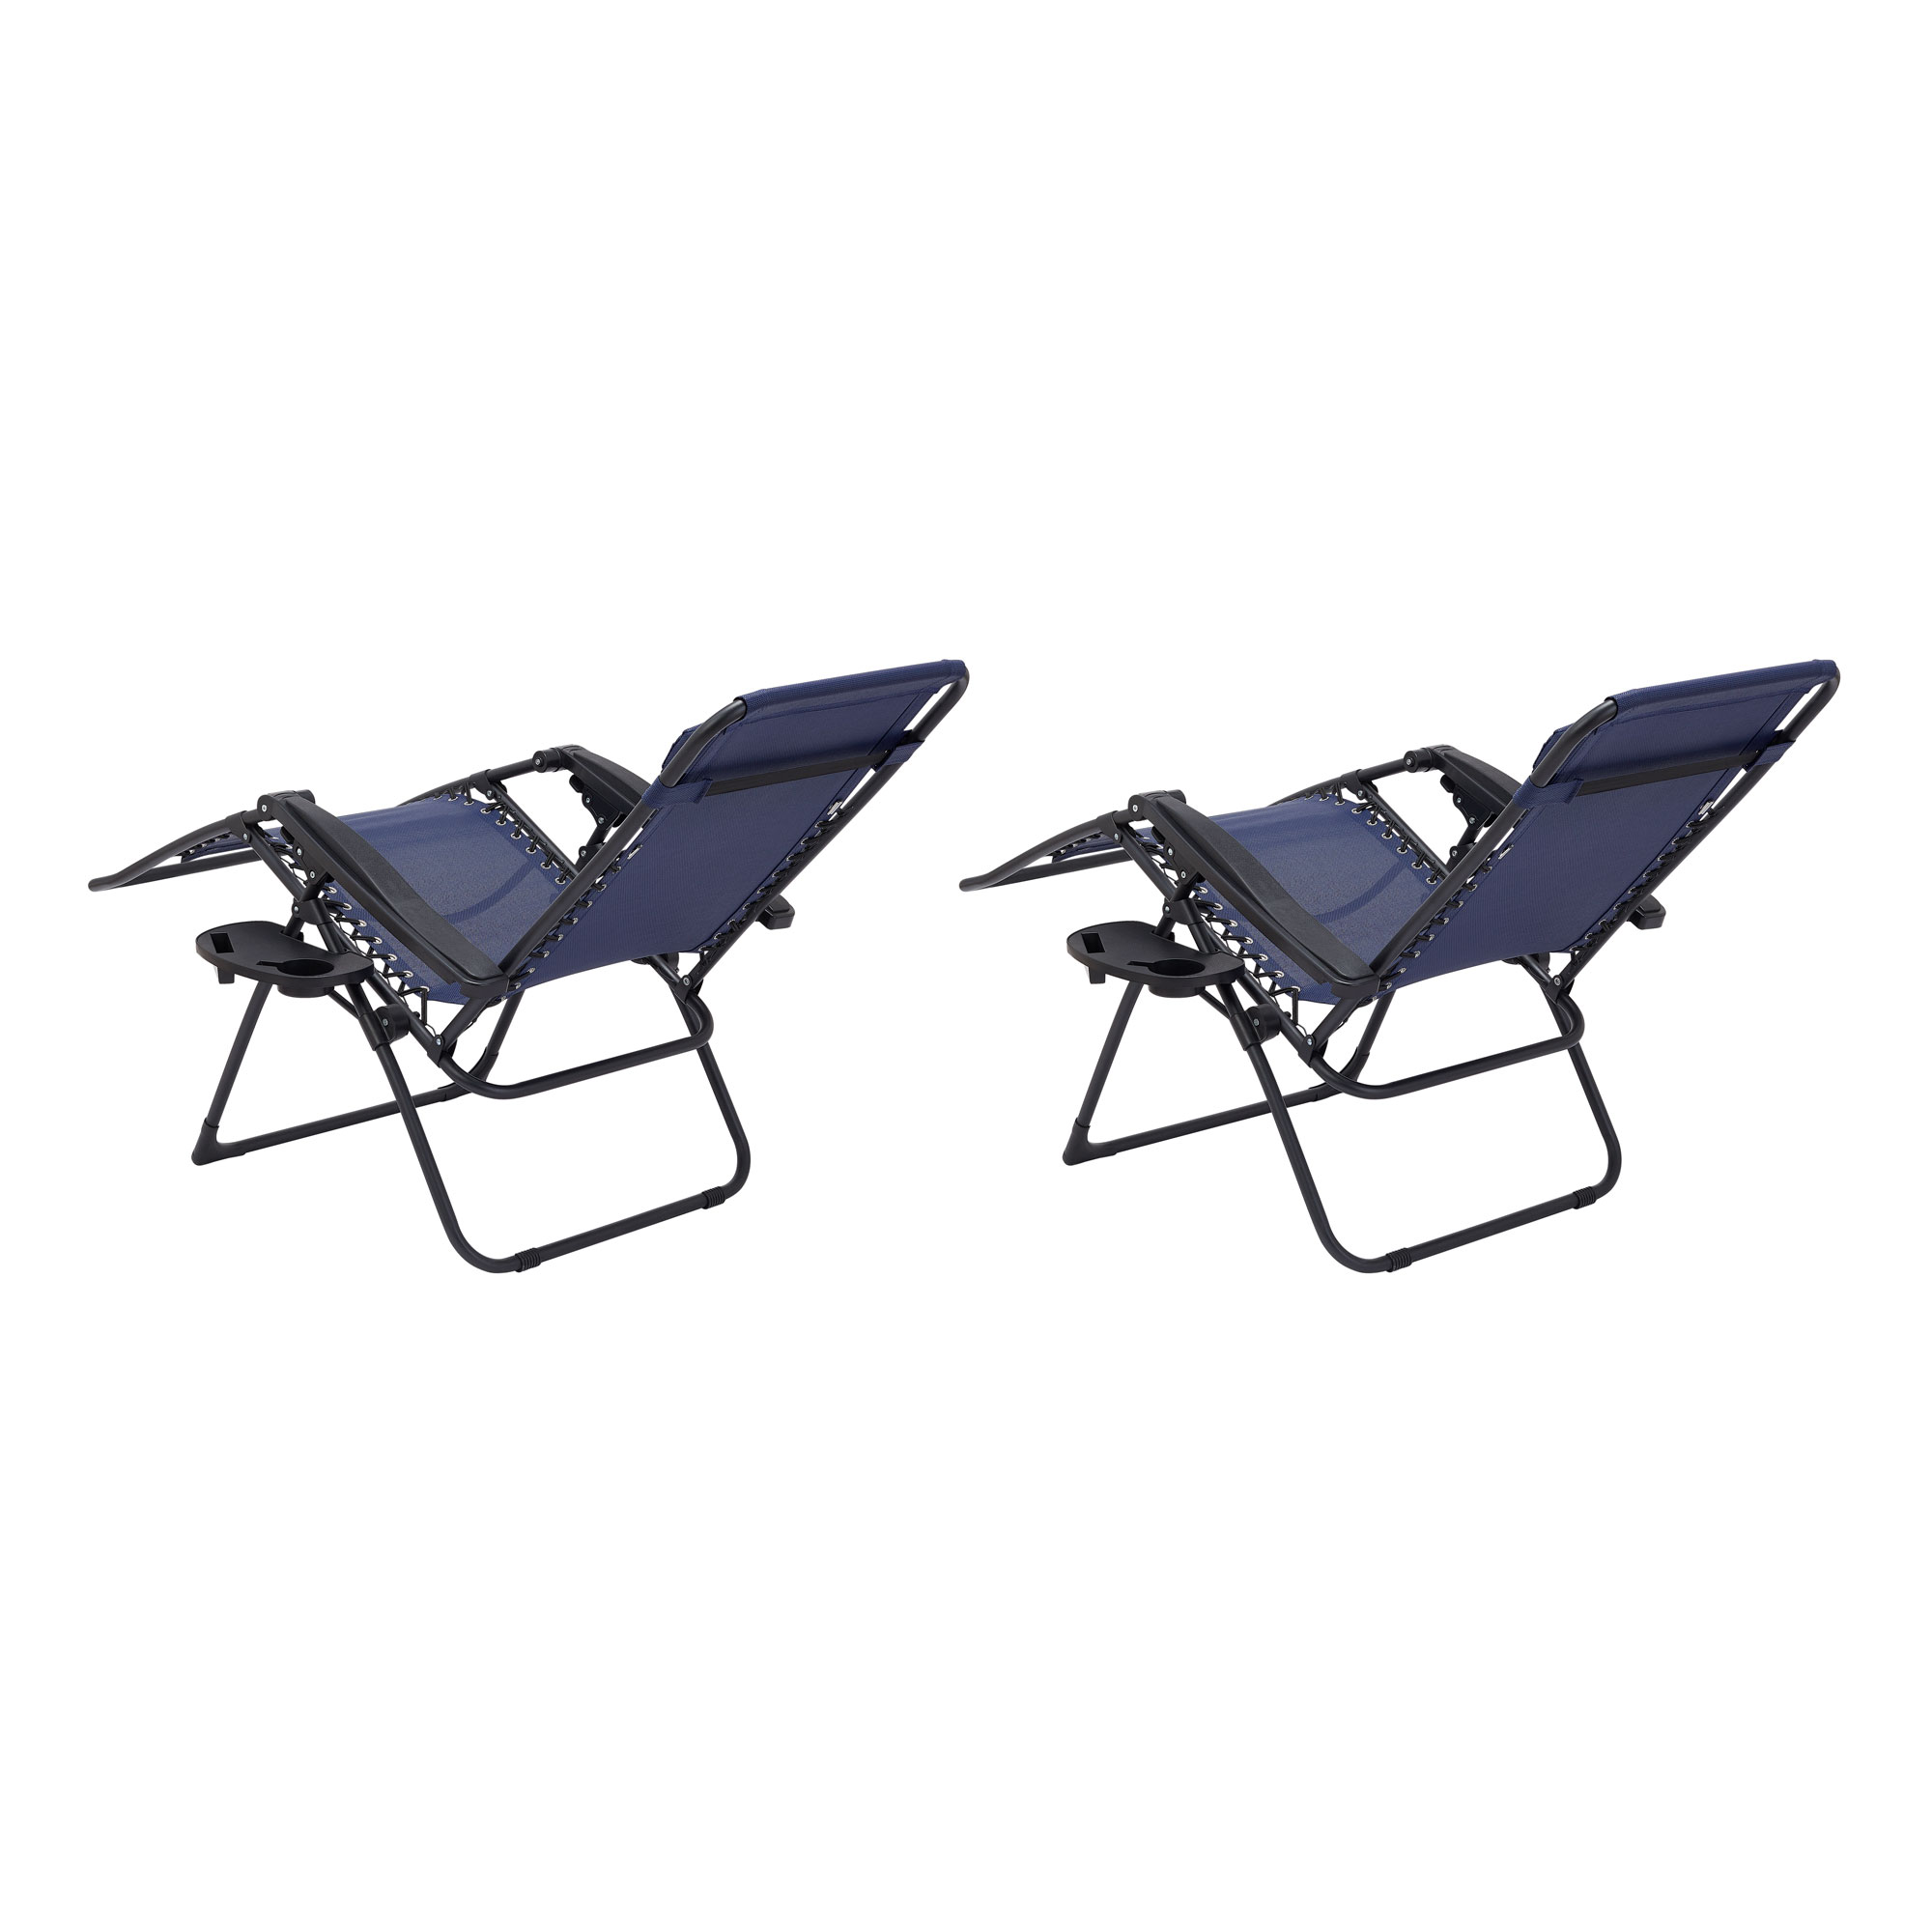 Mainstays Reclining Zero-Gravity Lounge Chair with Pillow and Cup Holder - Set of 2, Navy/Black - image 3 of 6